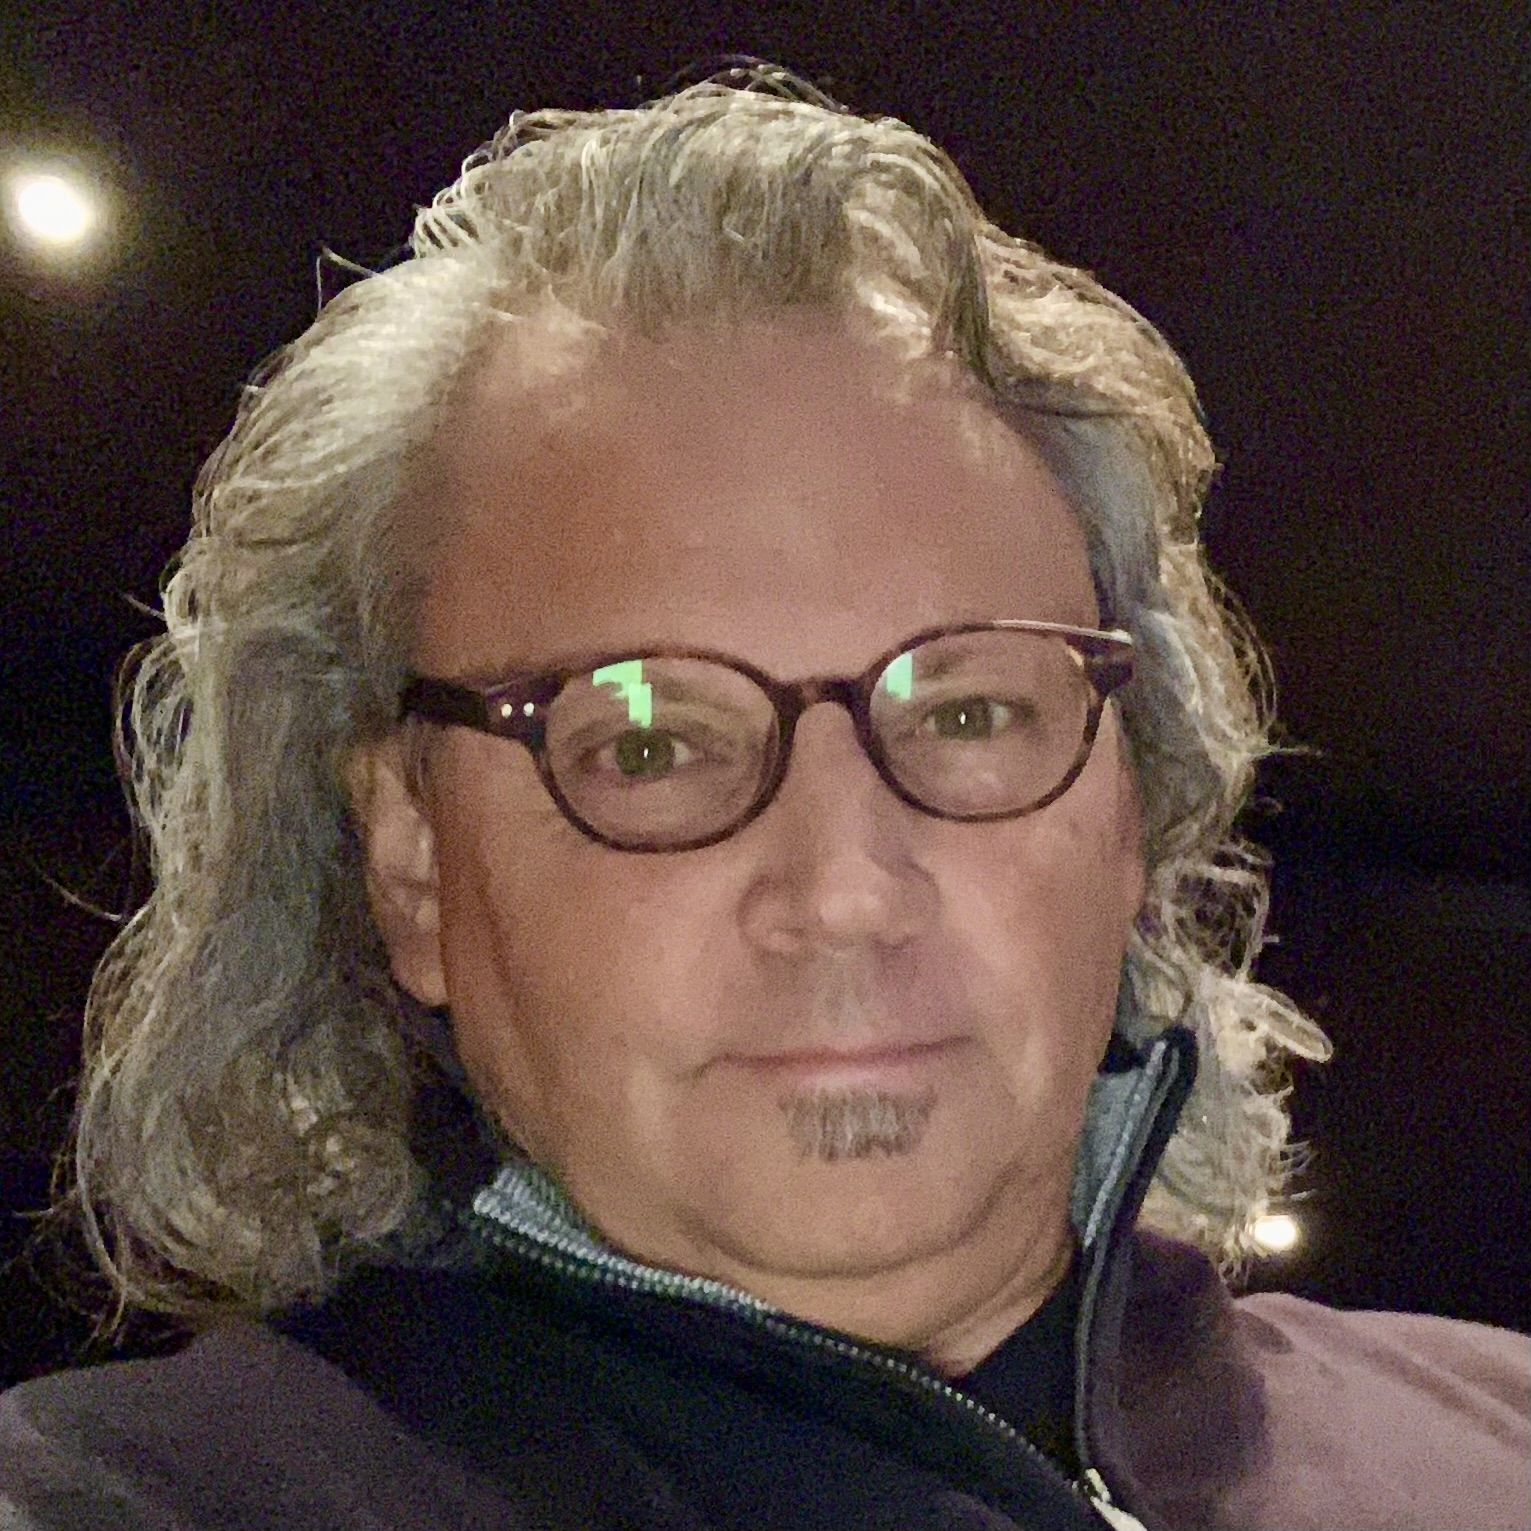 A man with long gray hair and glasses, wearing a pullover shirt. Individual is Douglas P. Fish, the Founder, Steward and CEO of Fish Stewarding Group.